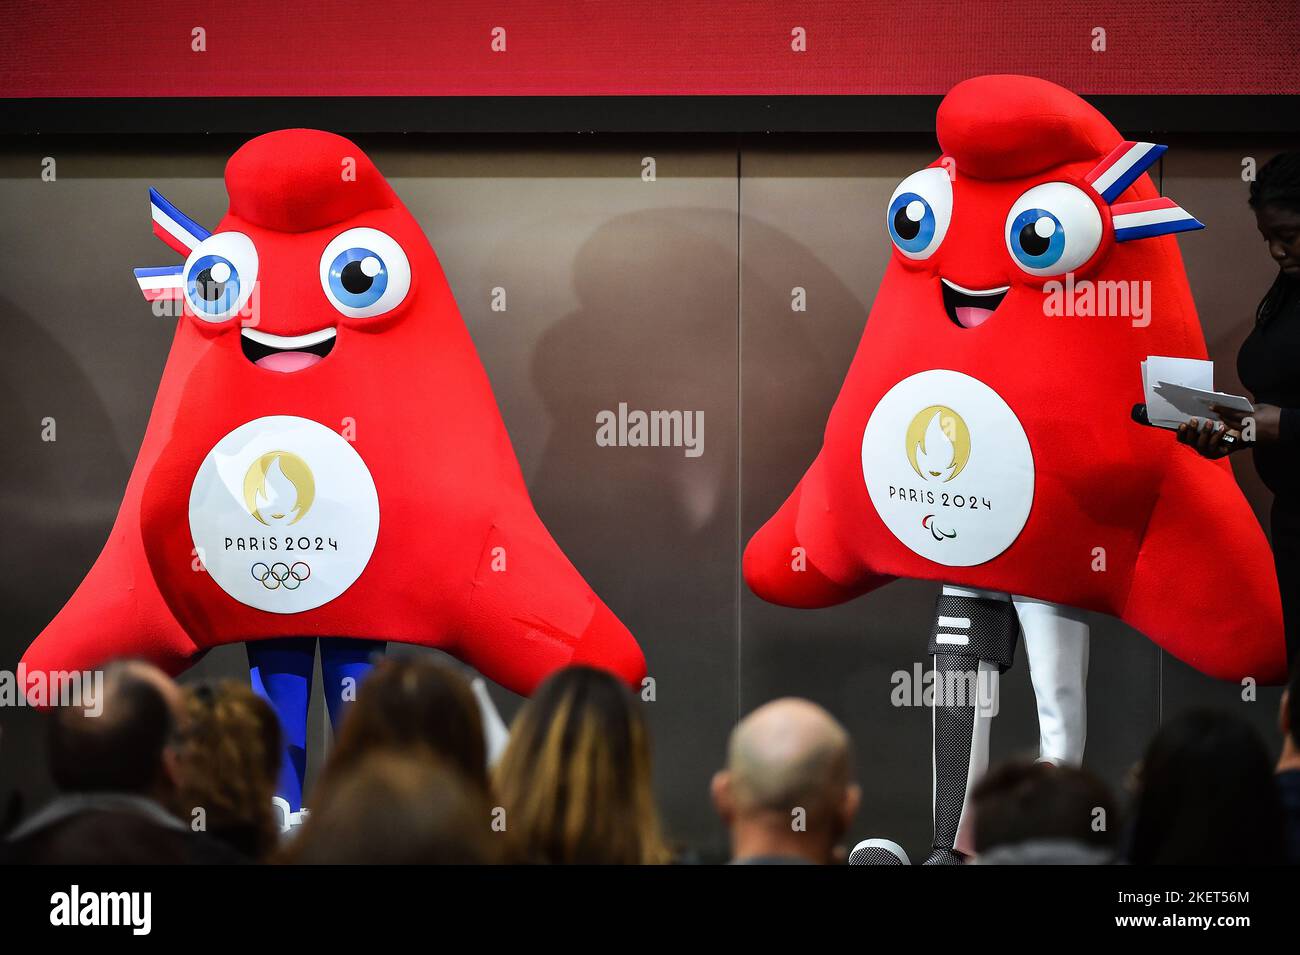 Illustration Mascots La Phryge Paralympique and La Phryge Olympique  during the Presentation of the Paris 2024 Olympic Mascots on November 14,  2022 in Paris, France - Photo: Matthieu Mirville/DPPI/LiveMedia Credit:  Independent Photo